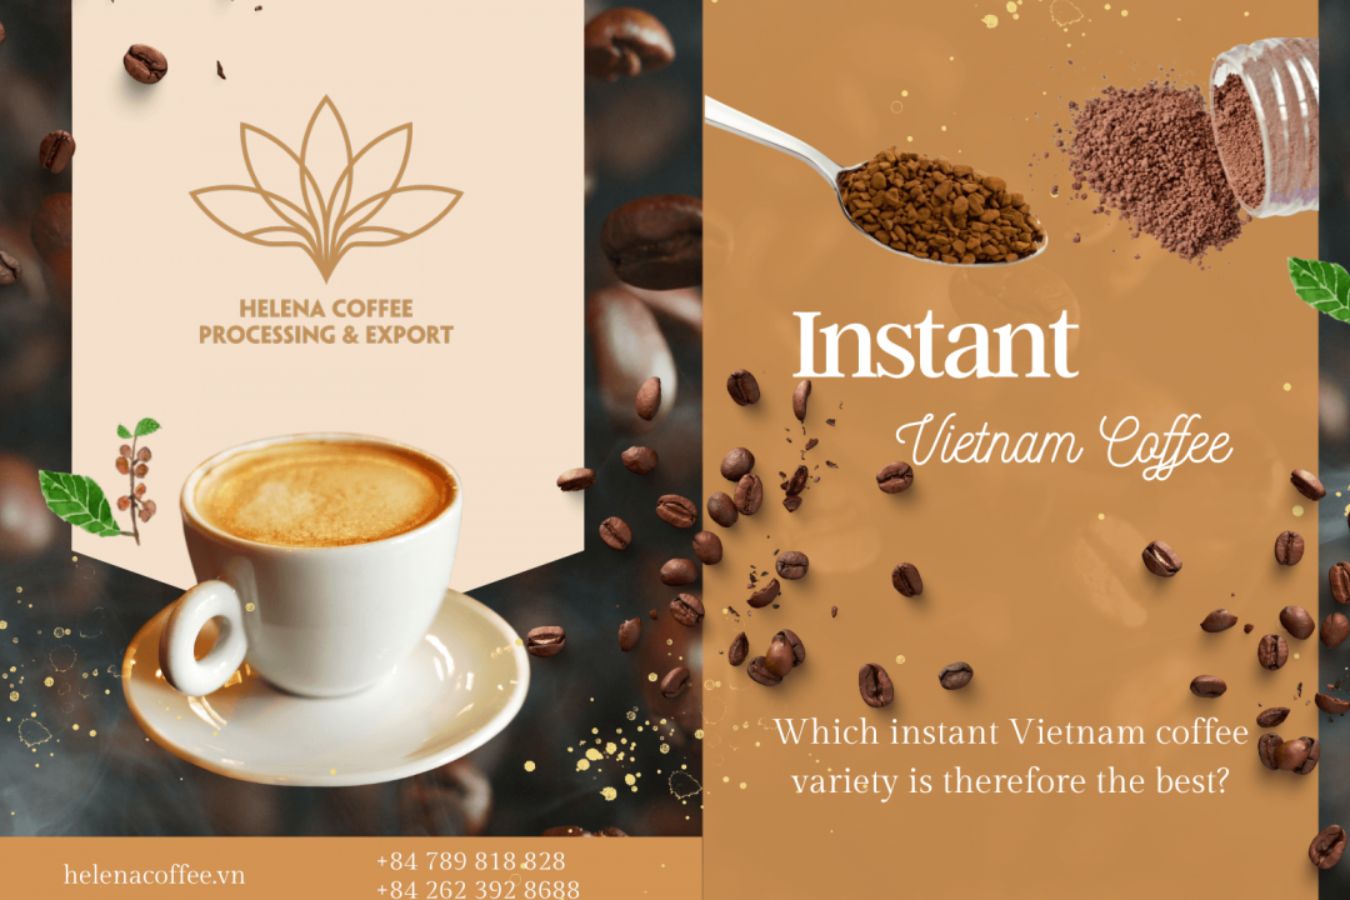 Instant Vietnam Coffee: Popular Among Young People